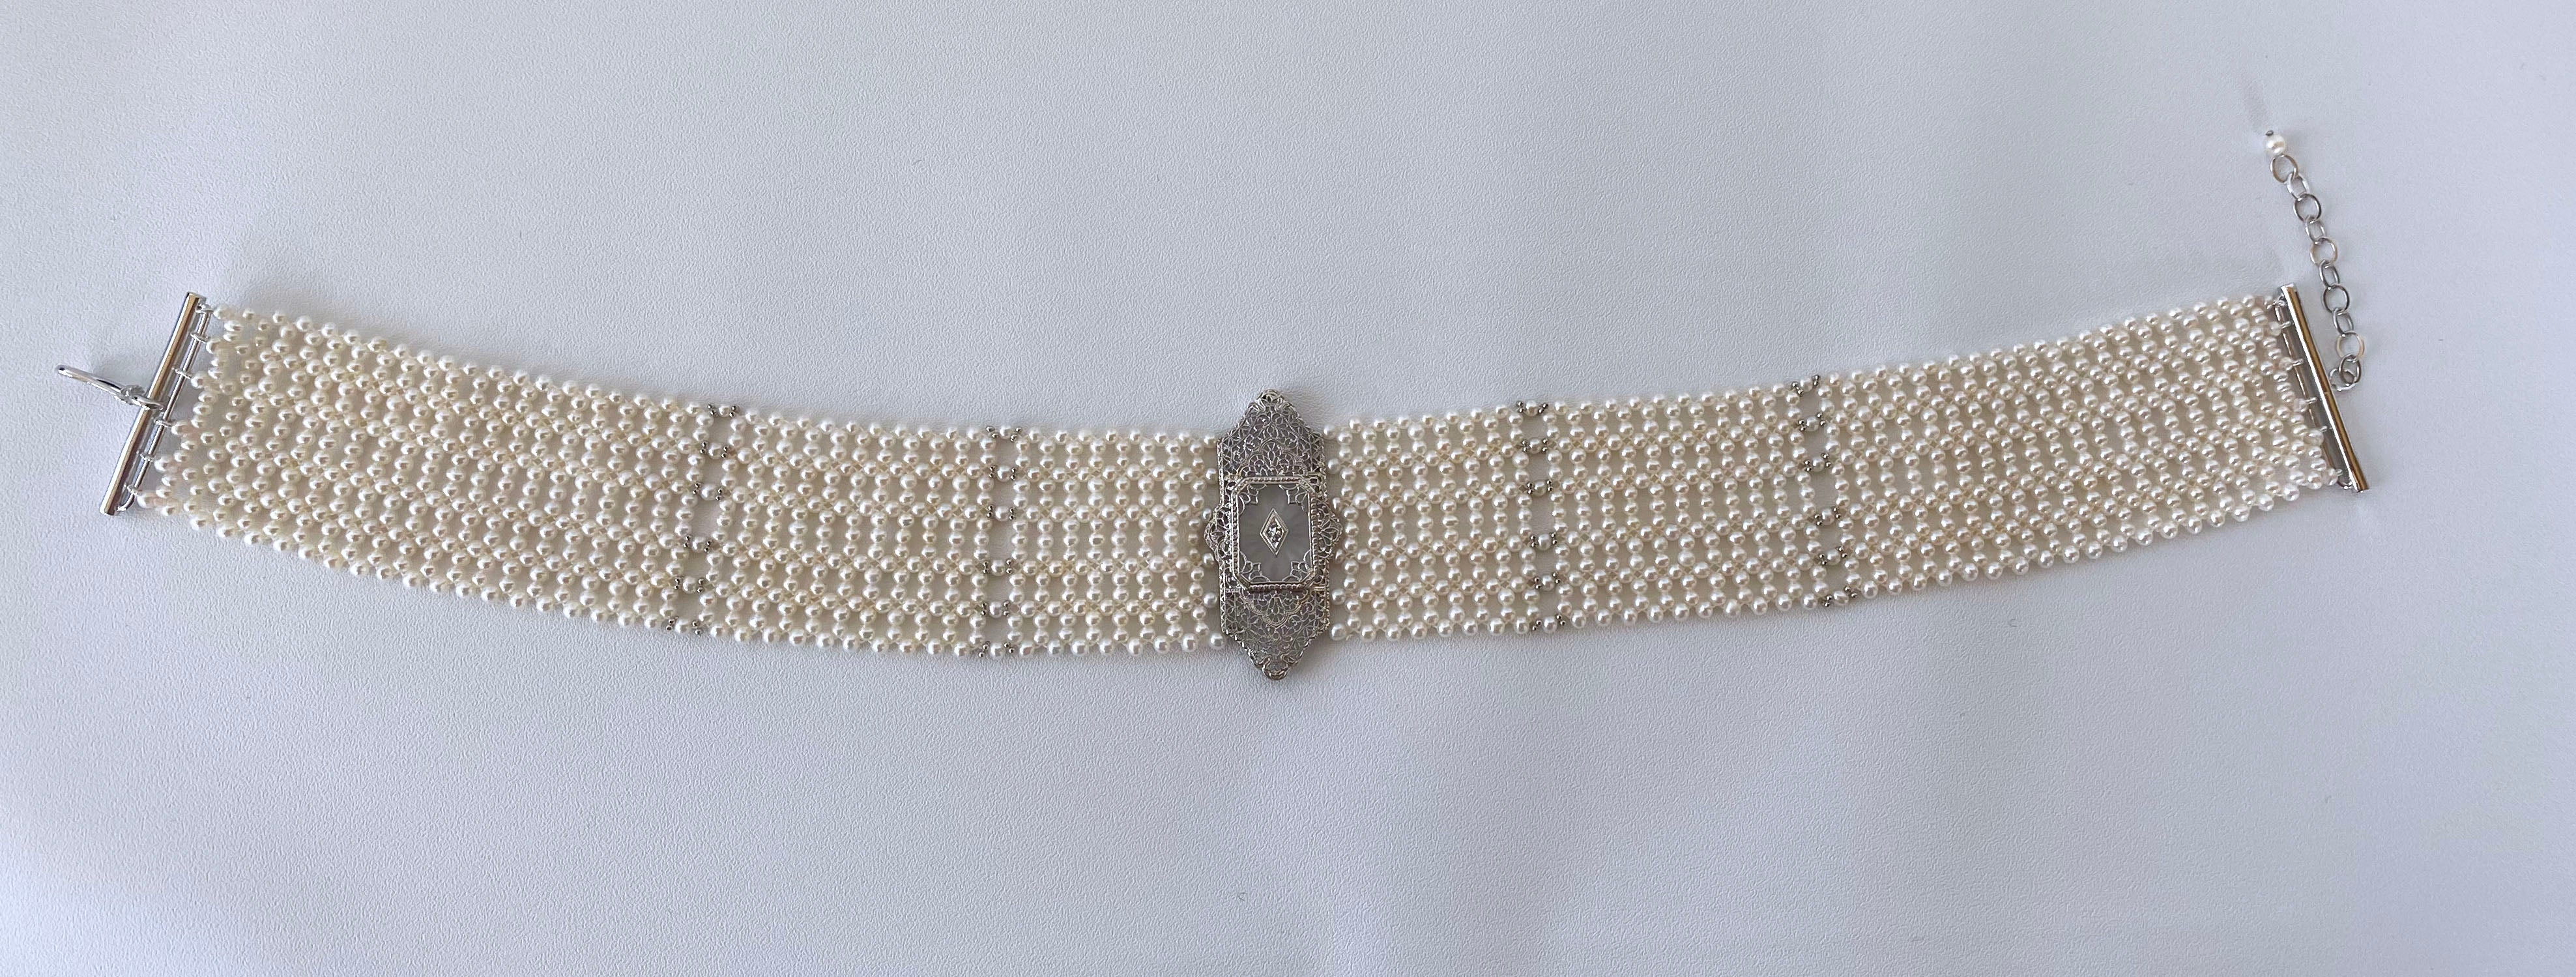 Gorgeous hand woven Pearl choker by Marina J. This lovely piece features a beautiful one of a kind Vintage 14k White Gold Brooch reworked and re imagined into a Centerpiece. The Centerpiece displays fine lace detailing and a beautiful small Diamond